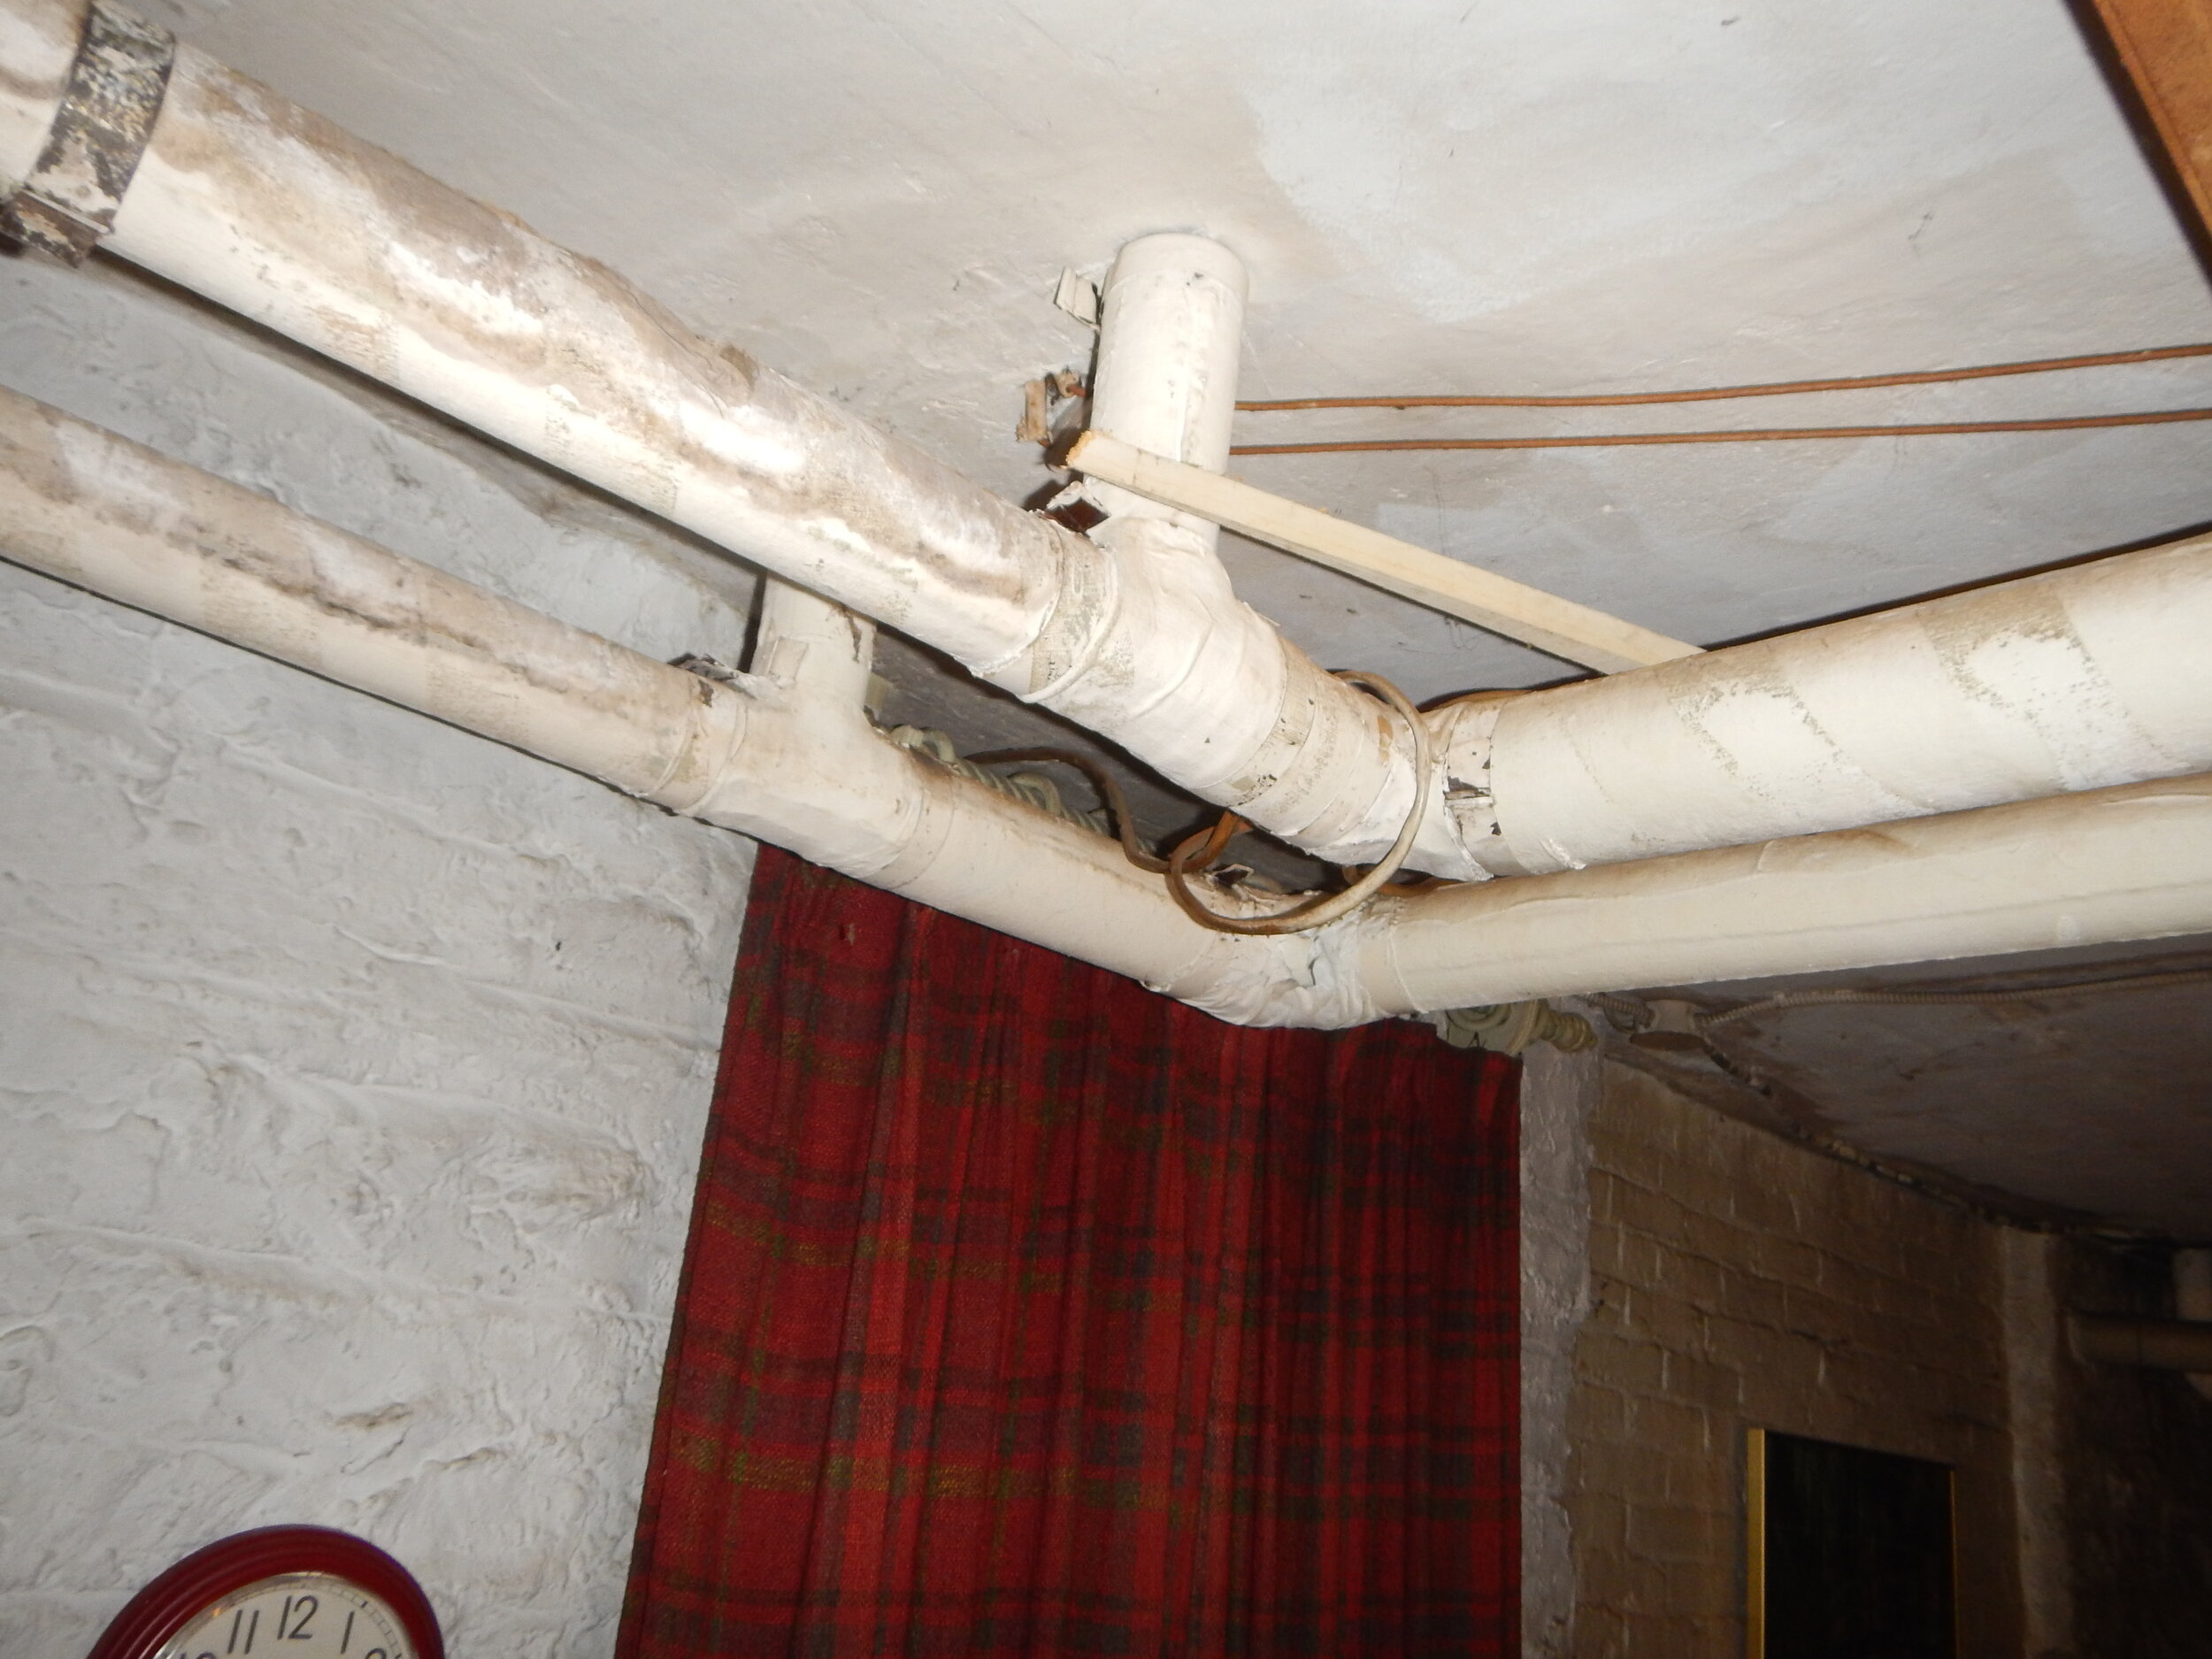 Pipe Insulation Likely Contains Asbestos